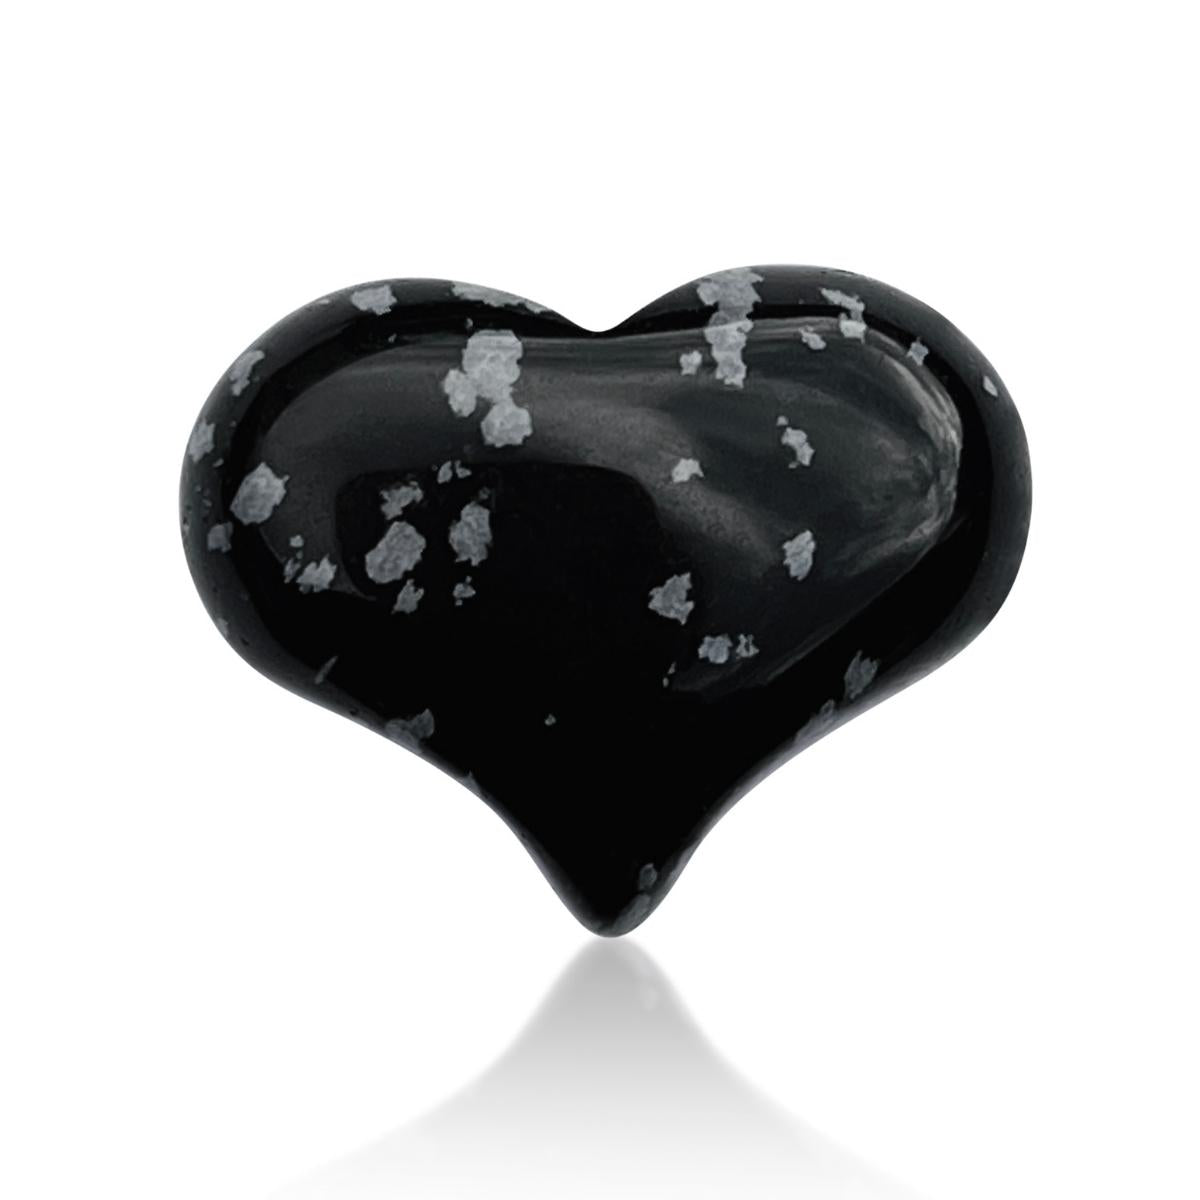 Snowflake Obsidian Heart Shaped Healing Gemstone for Releasing “Wrong Thinking” and stressful mental patterns. Snowflake Obsidian is calming and soothing.  It teaches you to value mistakes as well as successes.  A stone of purity, Snowflake Obsidian provides balance for body, mind and spirit. 